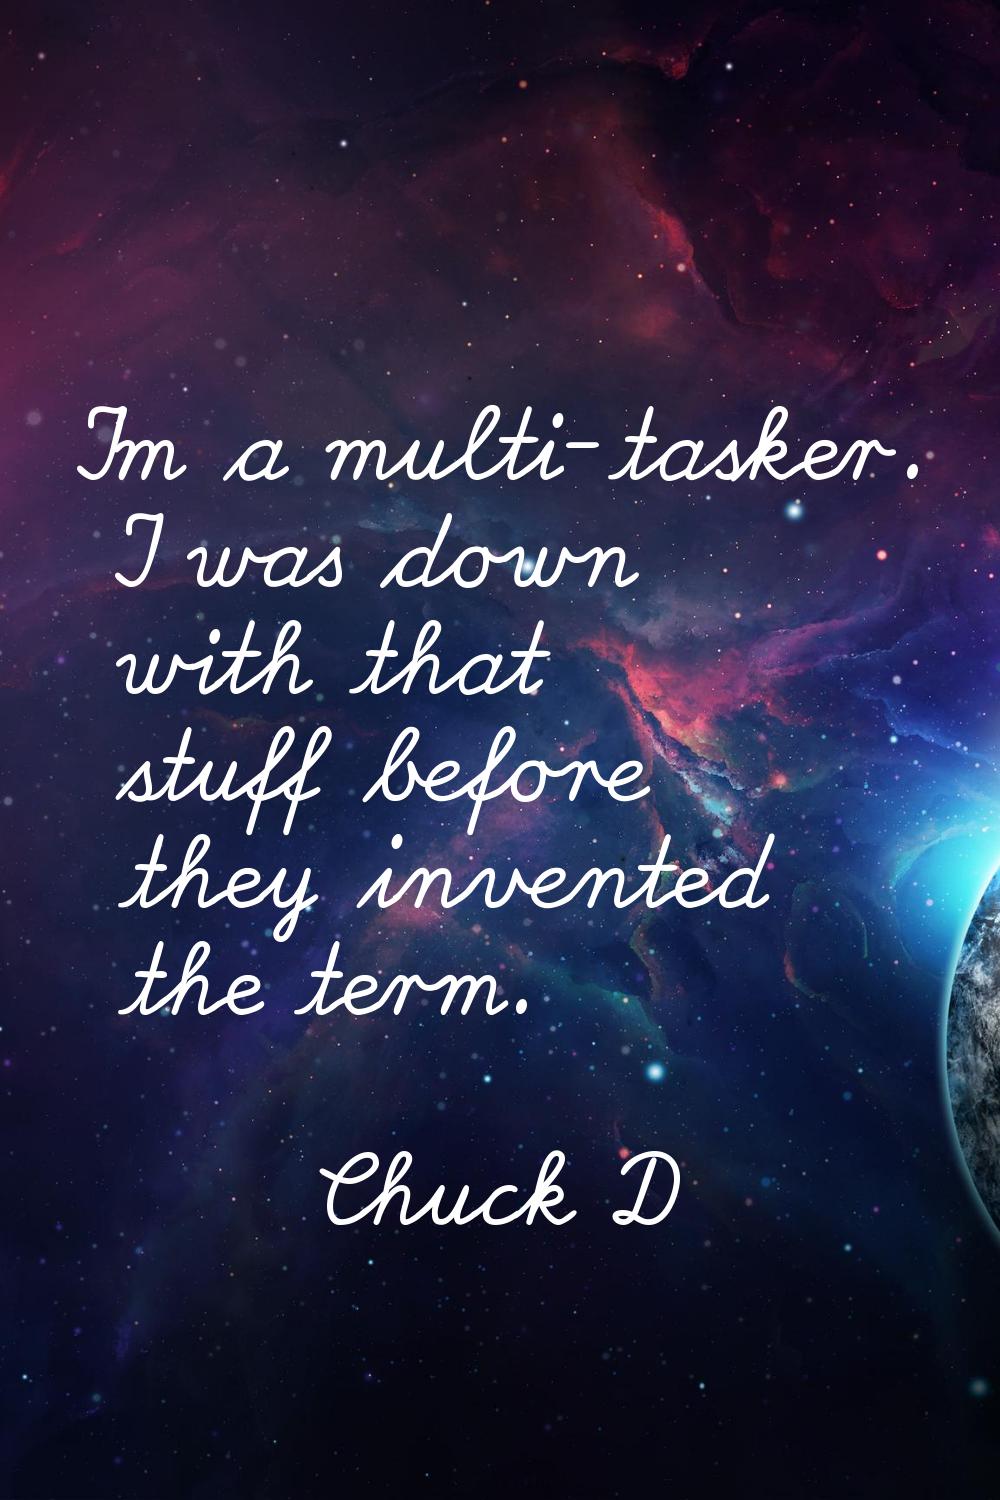 I'm a multi-tasker. I was down with that stuff before they invented the term.